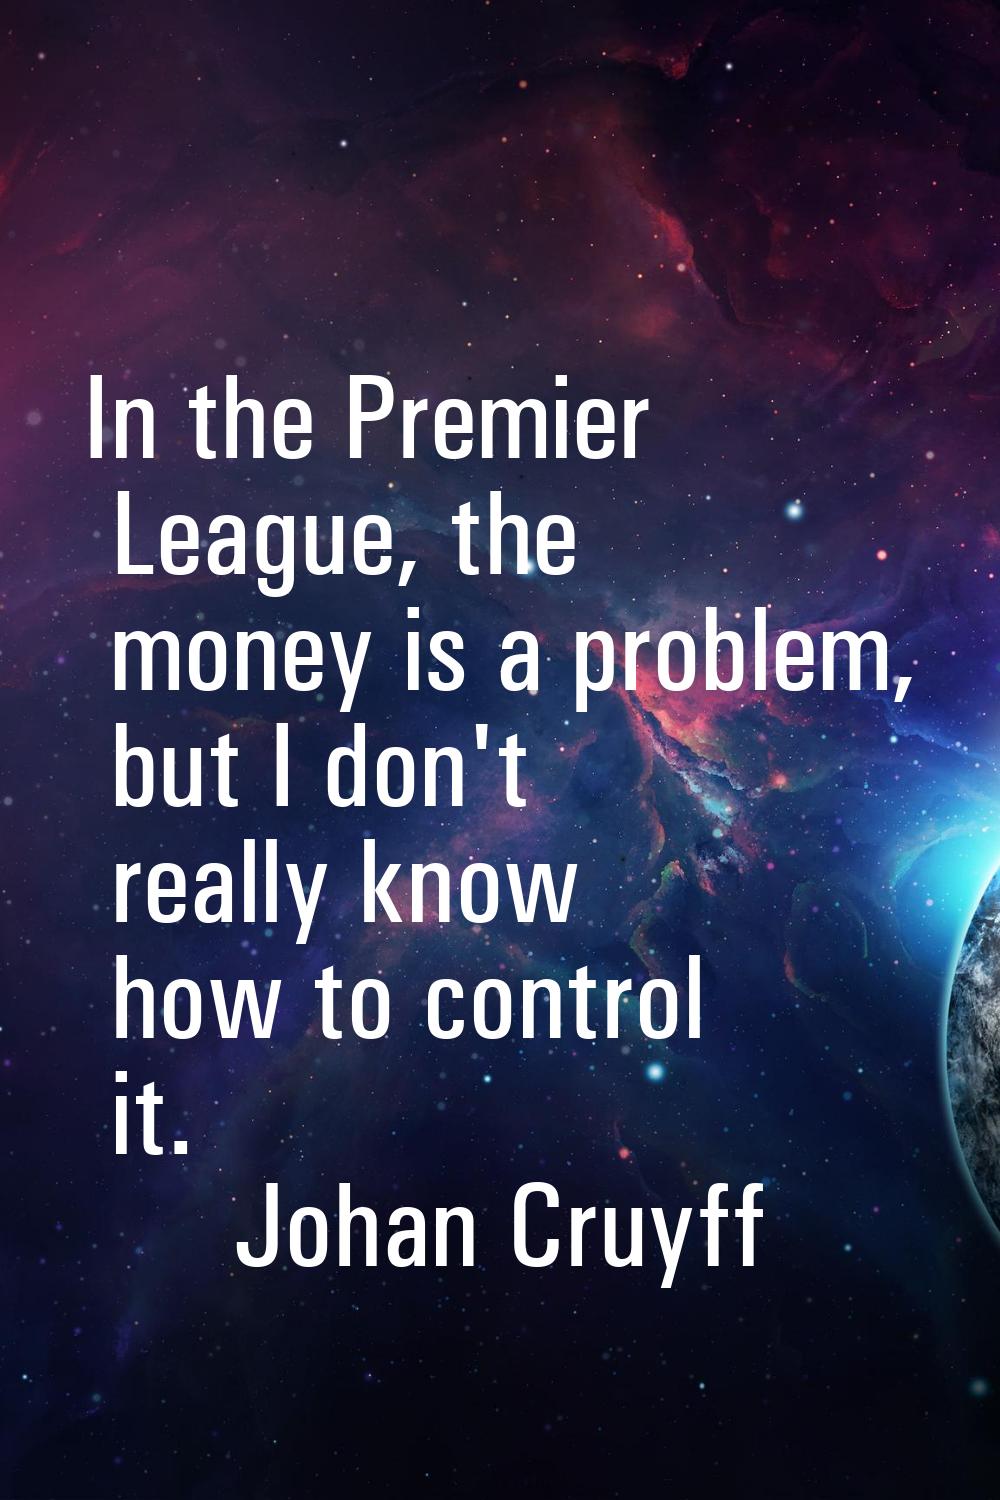 In the Premier League, the money is a problem, but I don't really know how to control it.